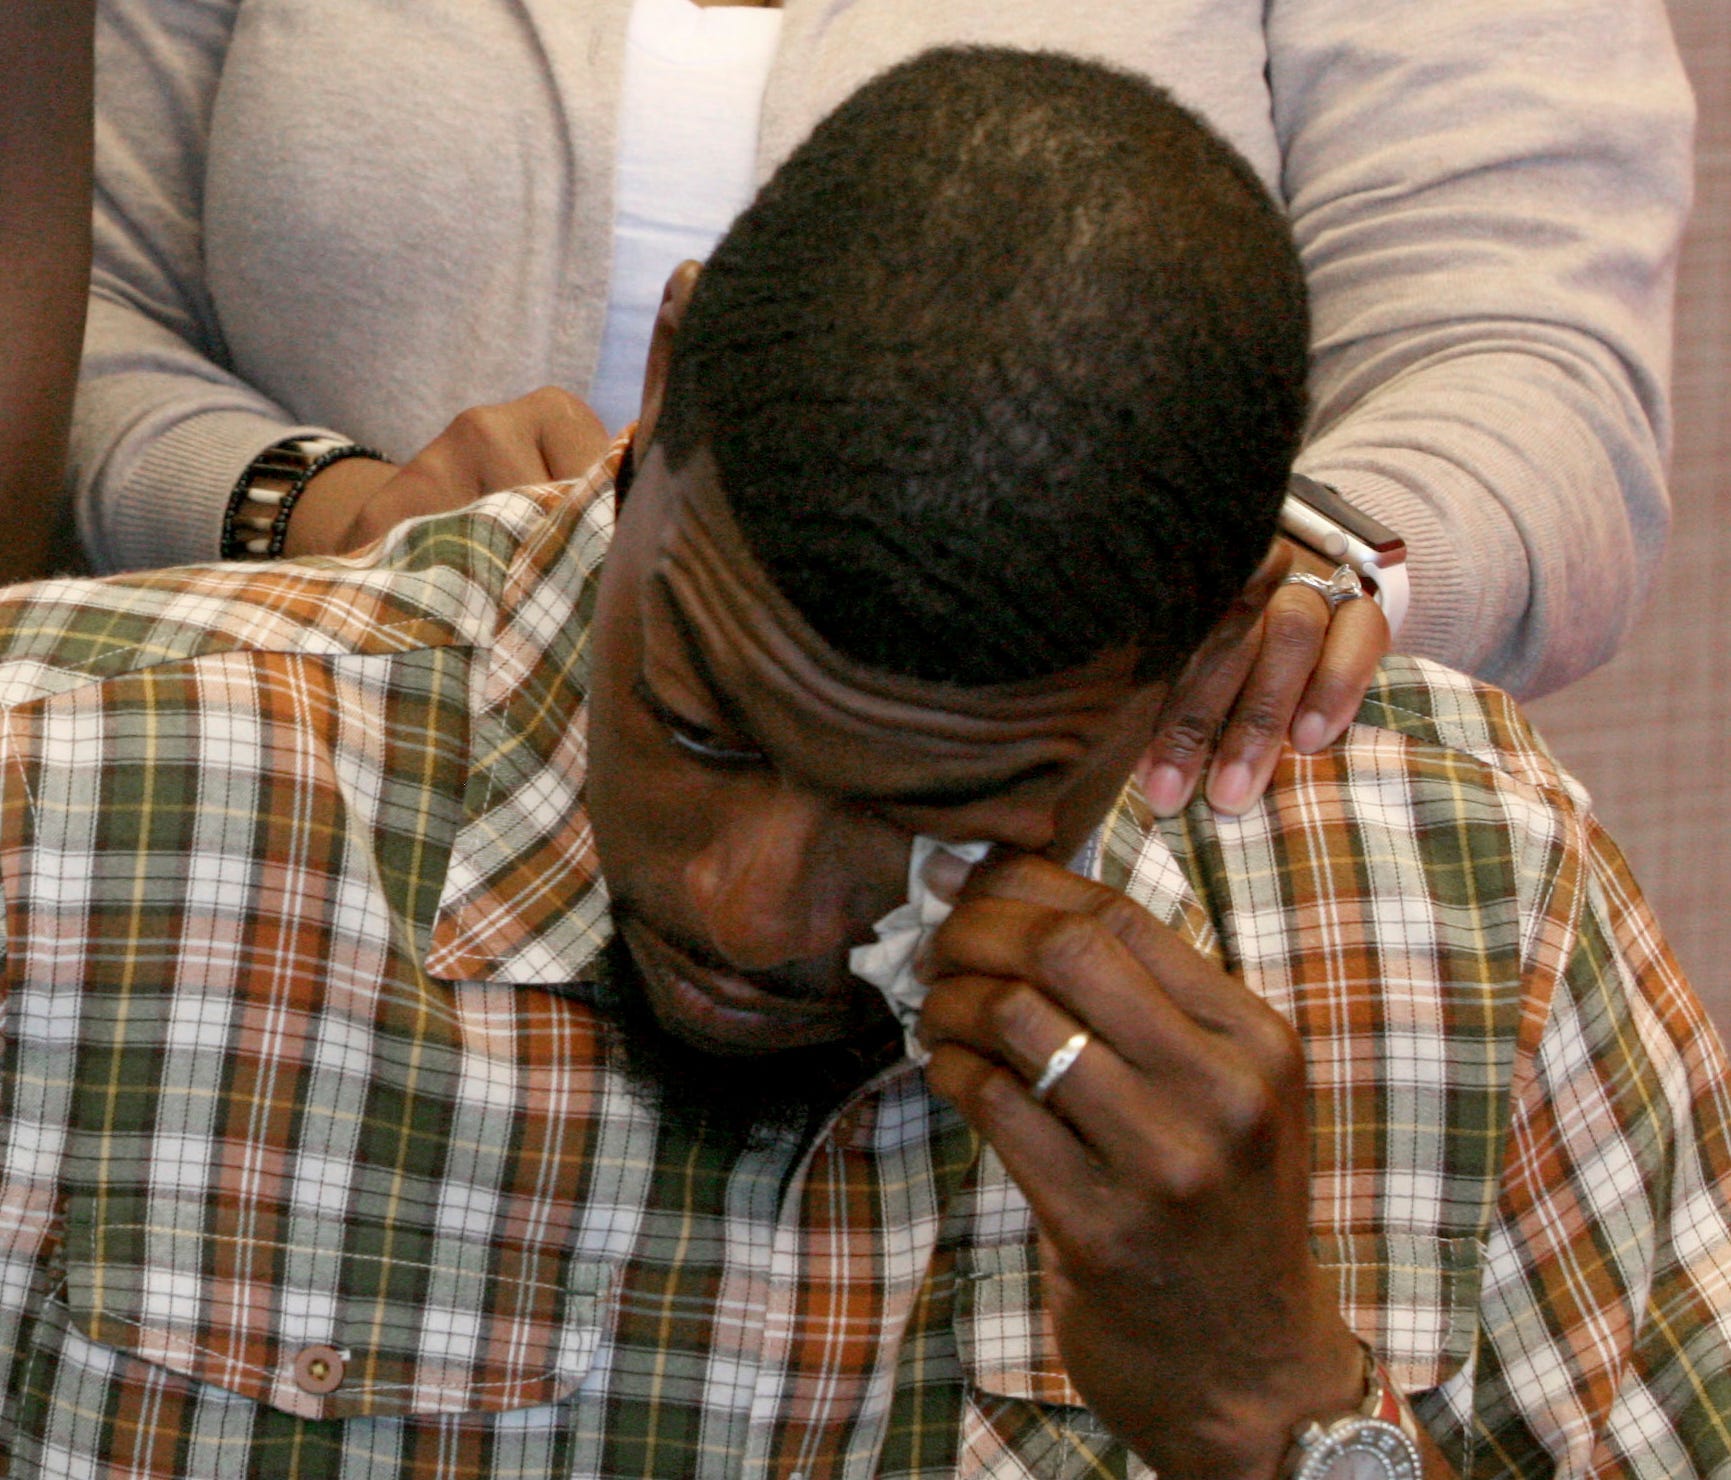 Odell Edwards wipes away tears as he sits with his wife, Charmaine, listening to their attorney Lee Merritt talk about the death of their son, Jordan Edwards, in a police shooting in Balch Springs, Texas.